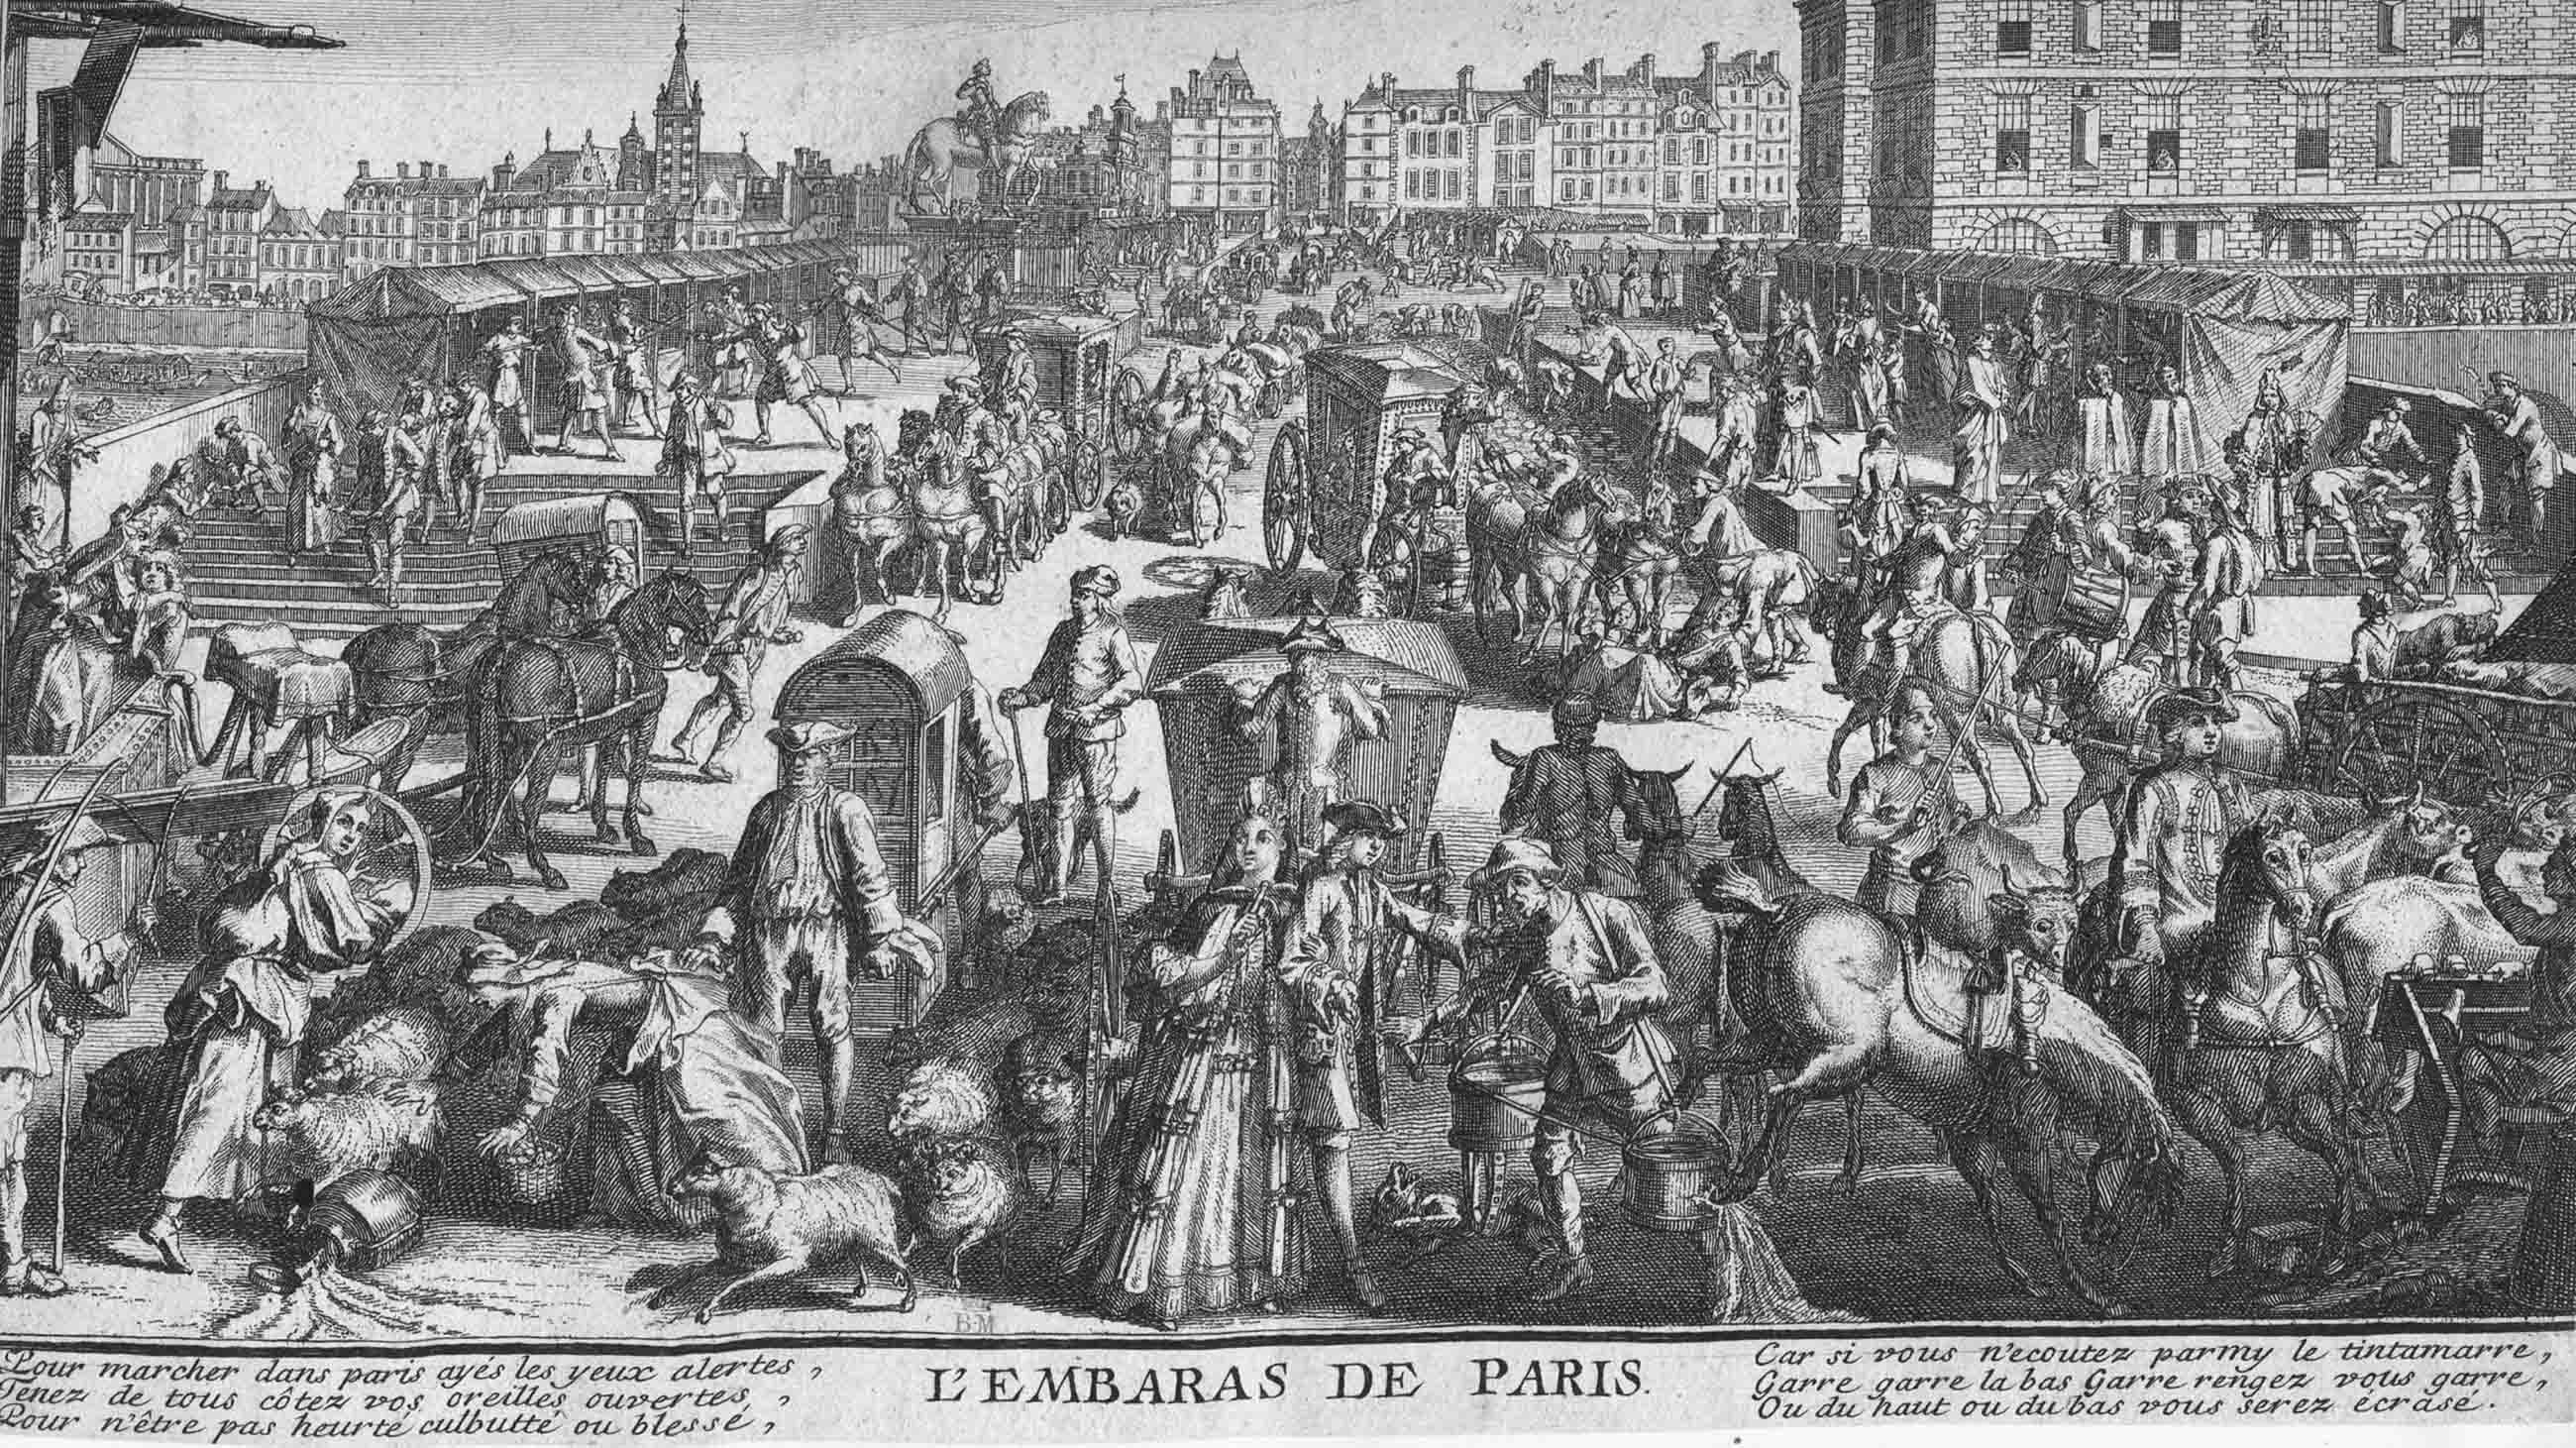 "The Embarrassment of Paris," from an etching by Nicolas Guérard, about 1700. Parisians had to be coerced to keep their streets clean. Visual: Trustees of the British Museum.